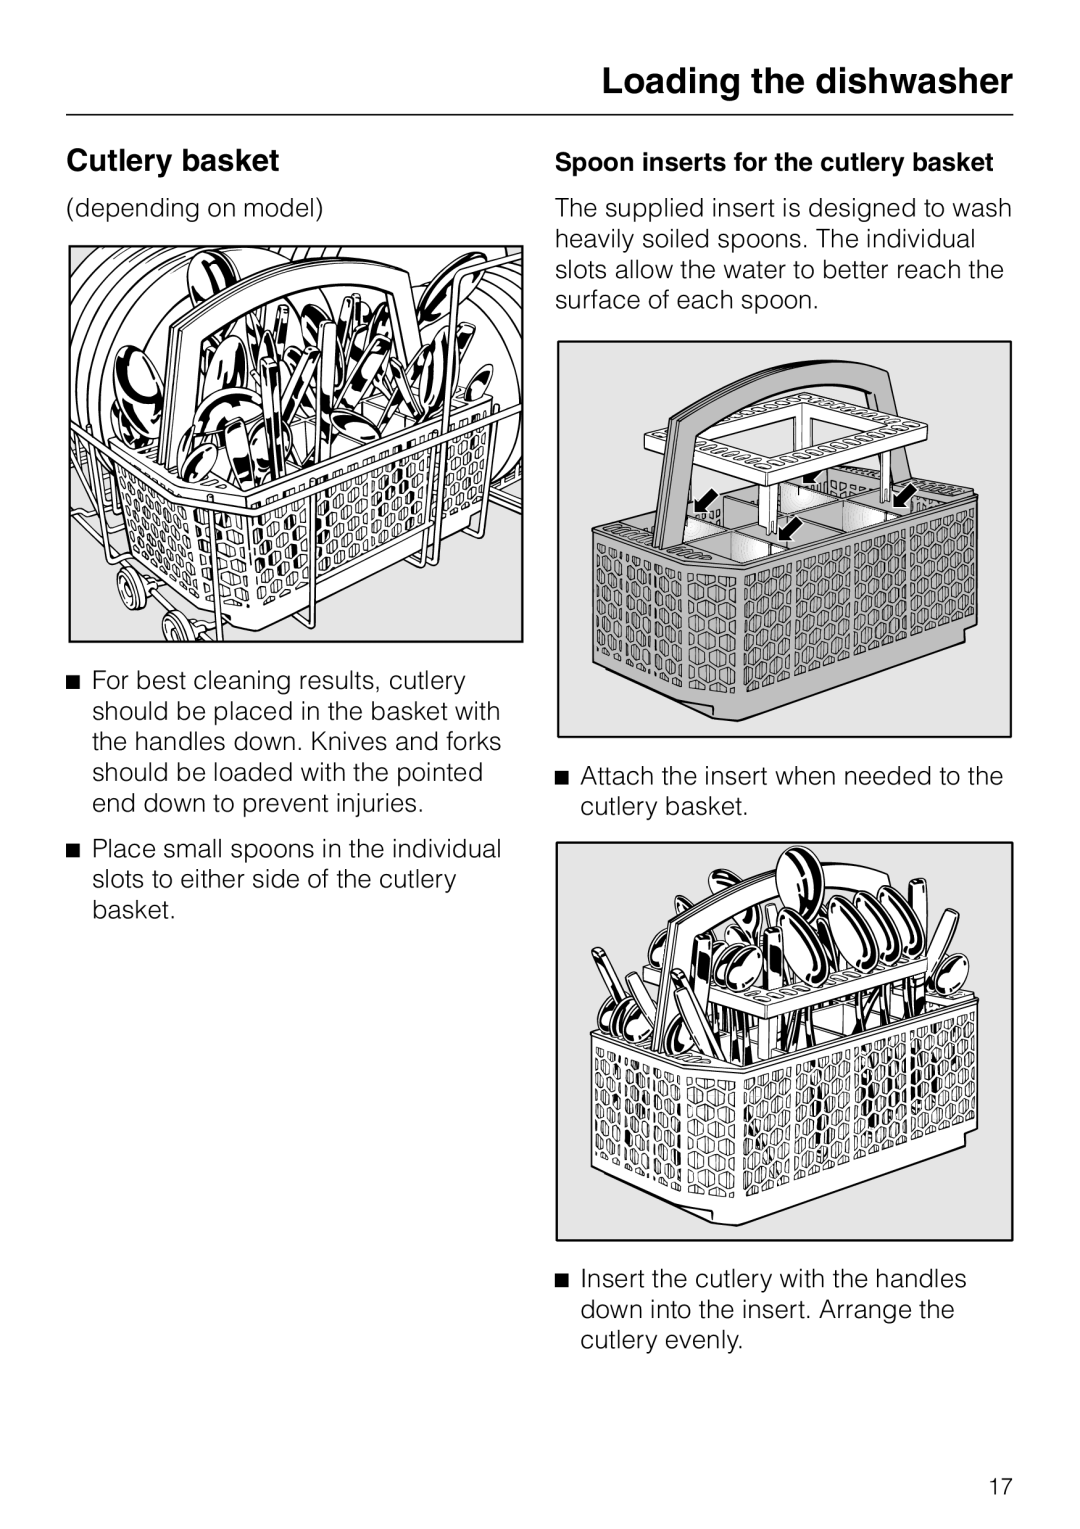 Miele G 2020 manual Cutlery basket, Loading the dishwasher, Spoon inserts for the cutlery basket 